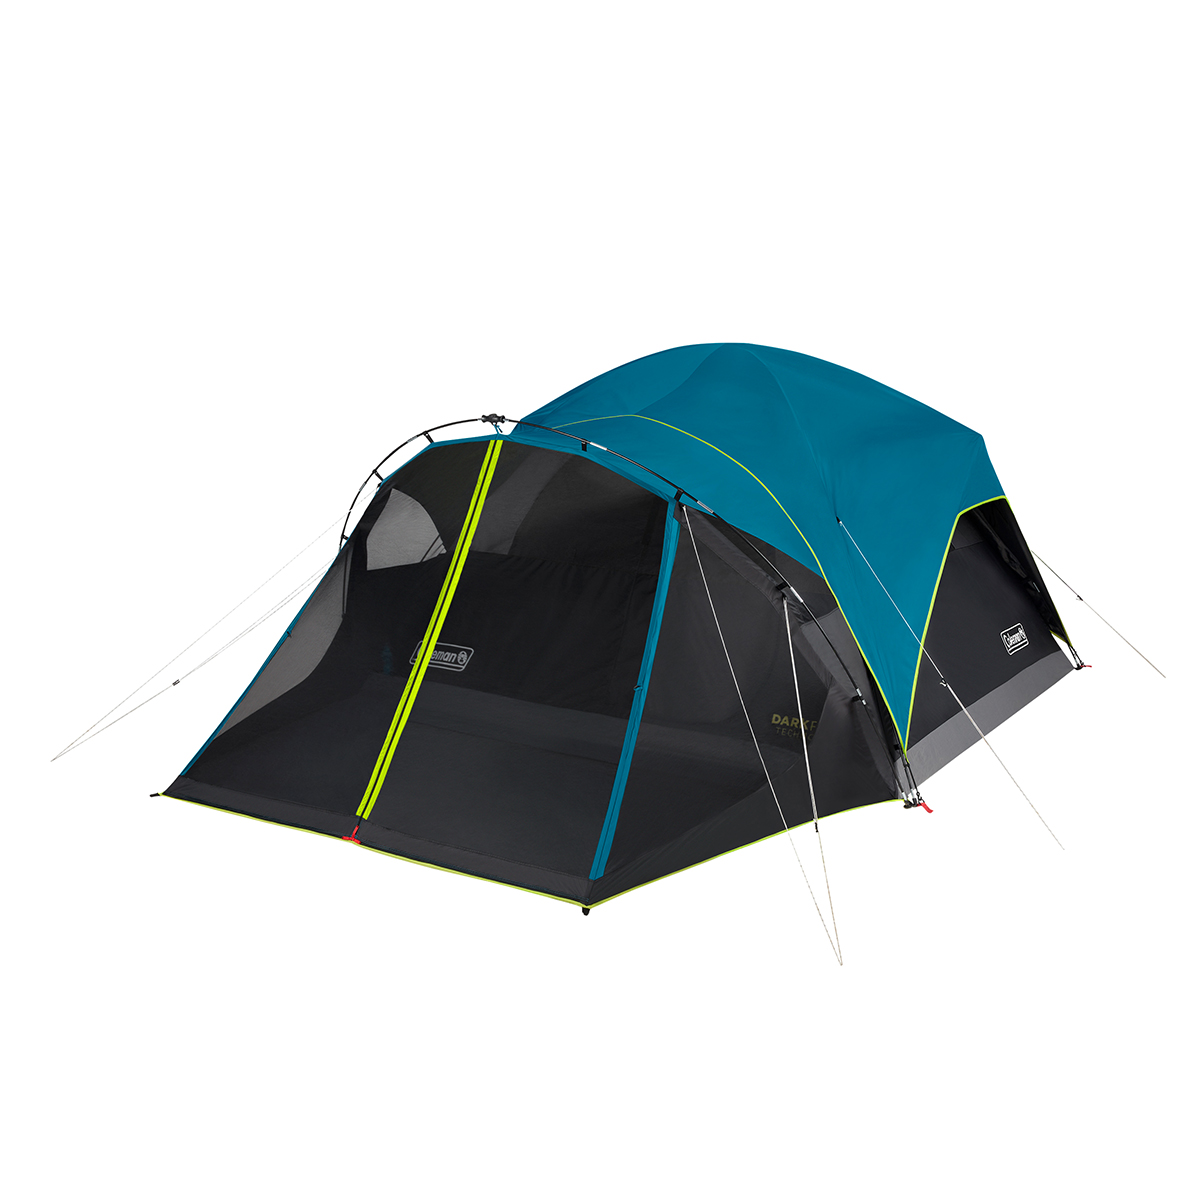 Coleman 6-Person Carlsbad Dark Room Dome Camping Tent with Screen Room - image 1 of 9